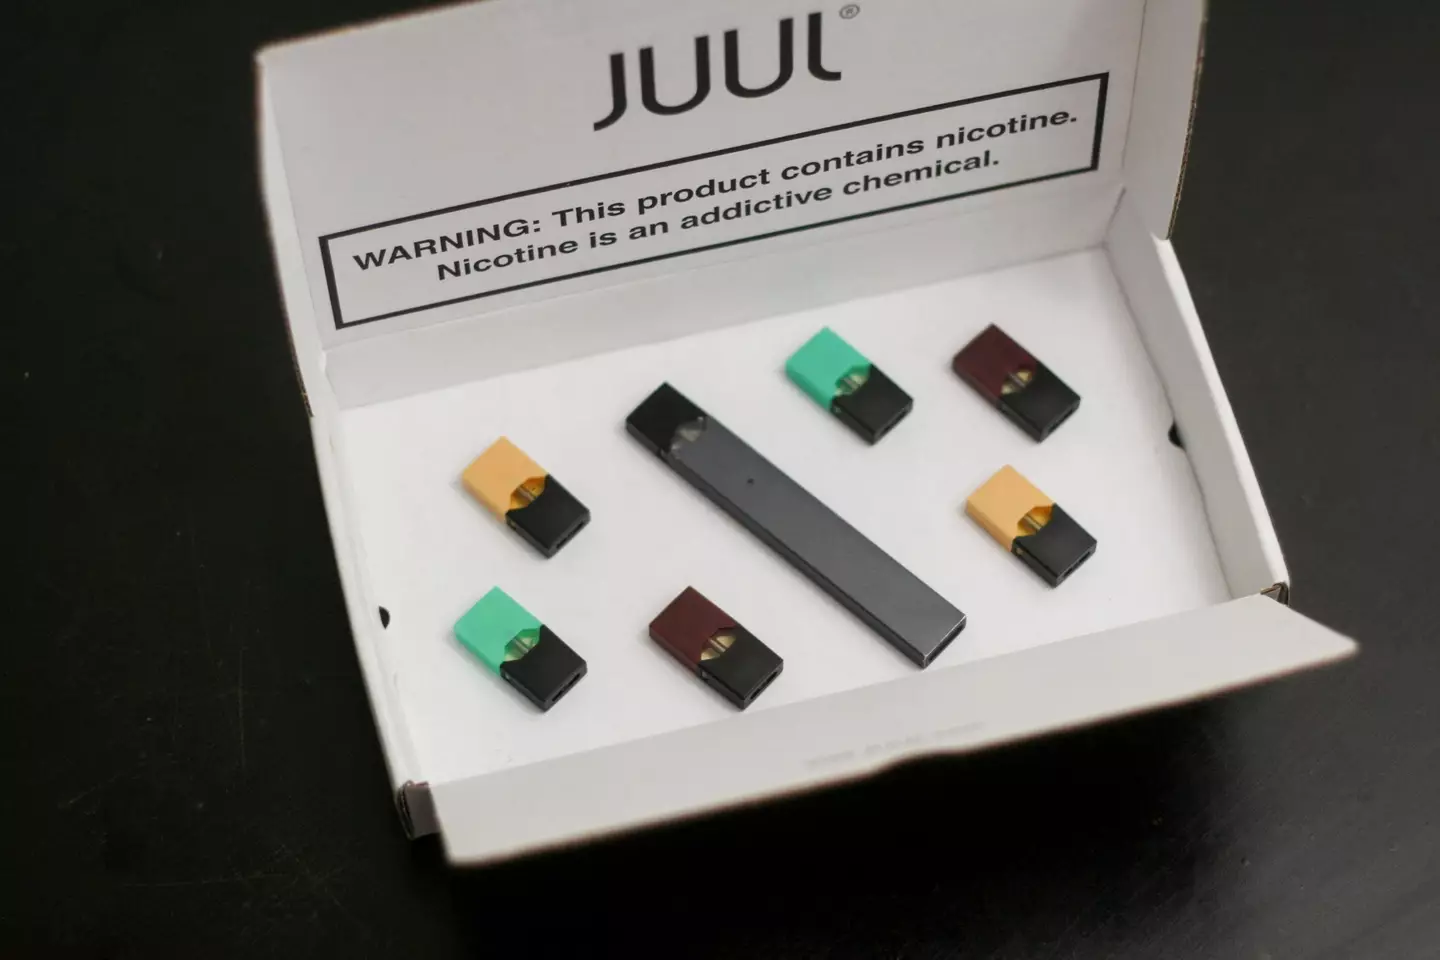 Juul has been granted a pause on the ban so it can consider its options.